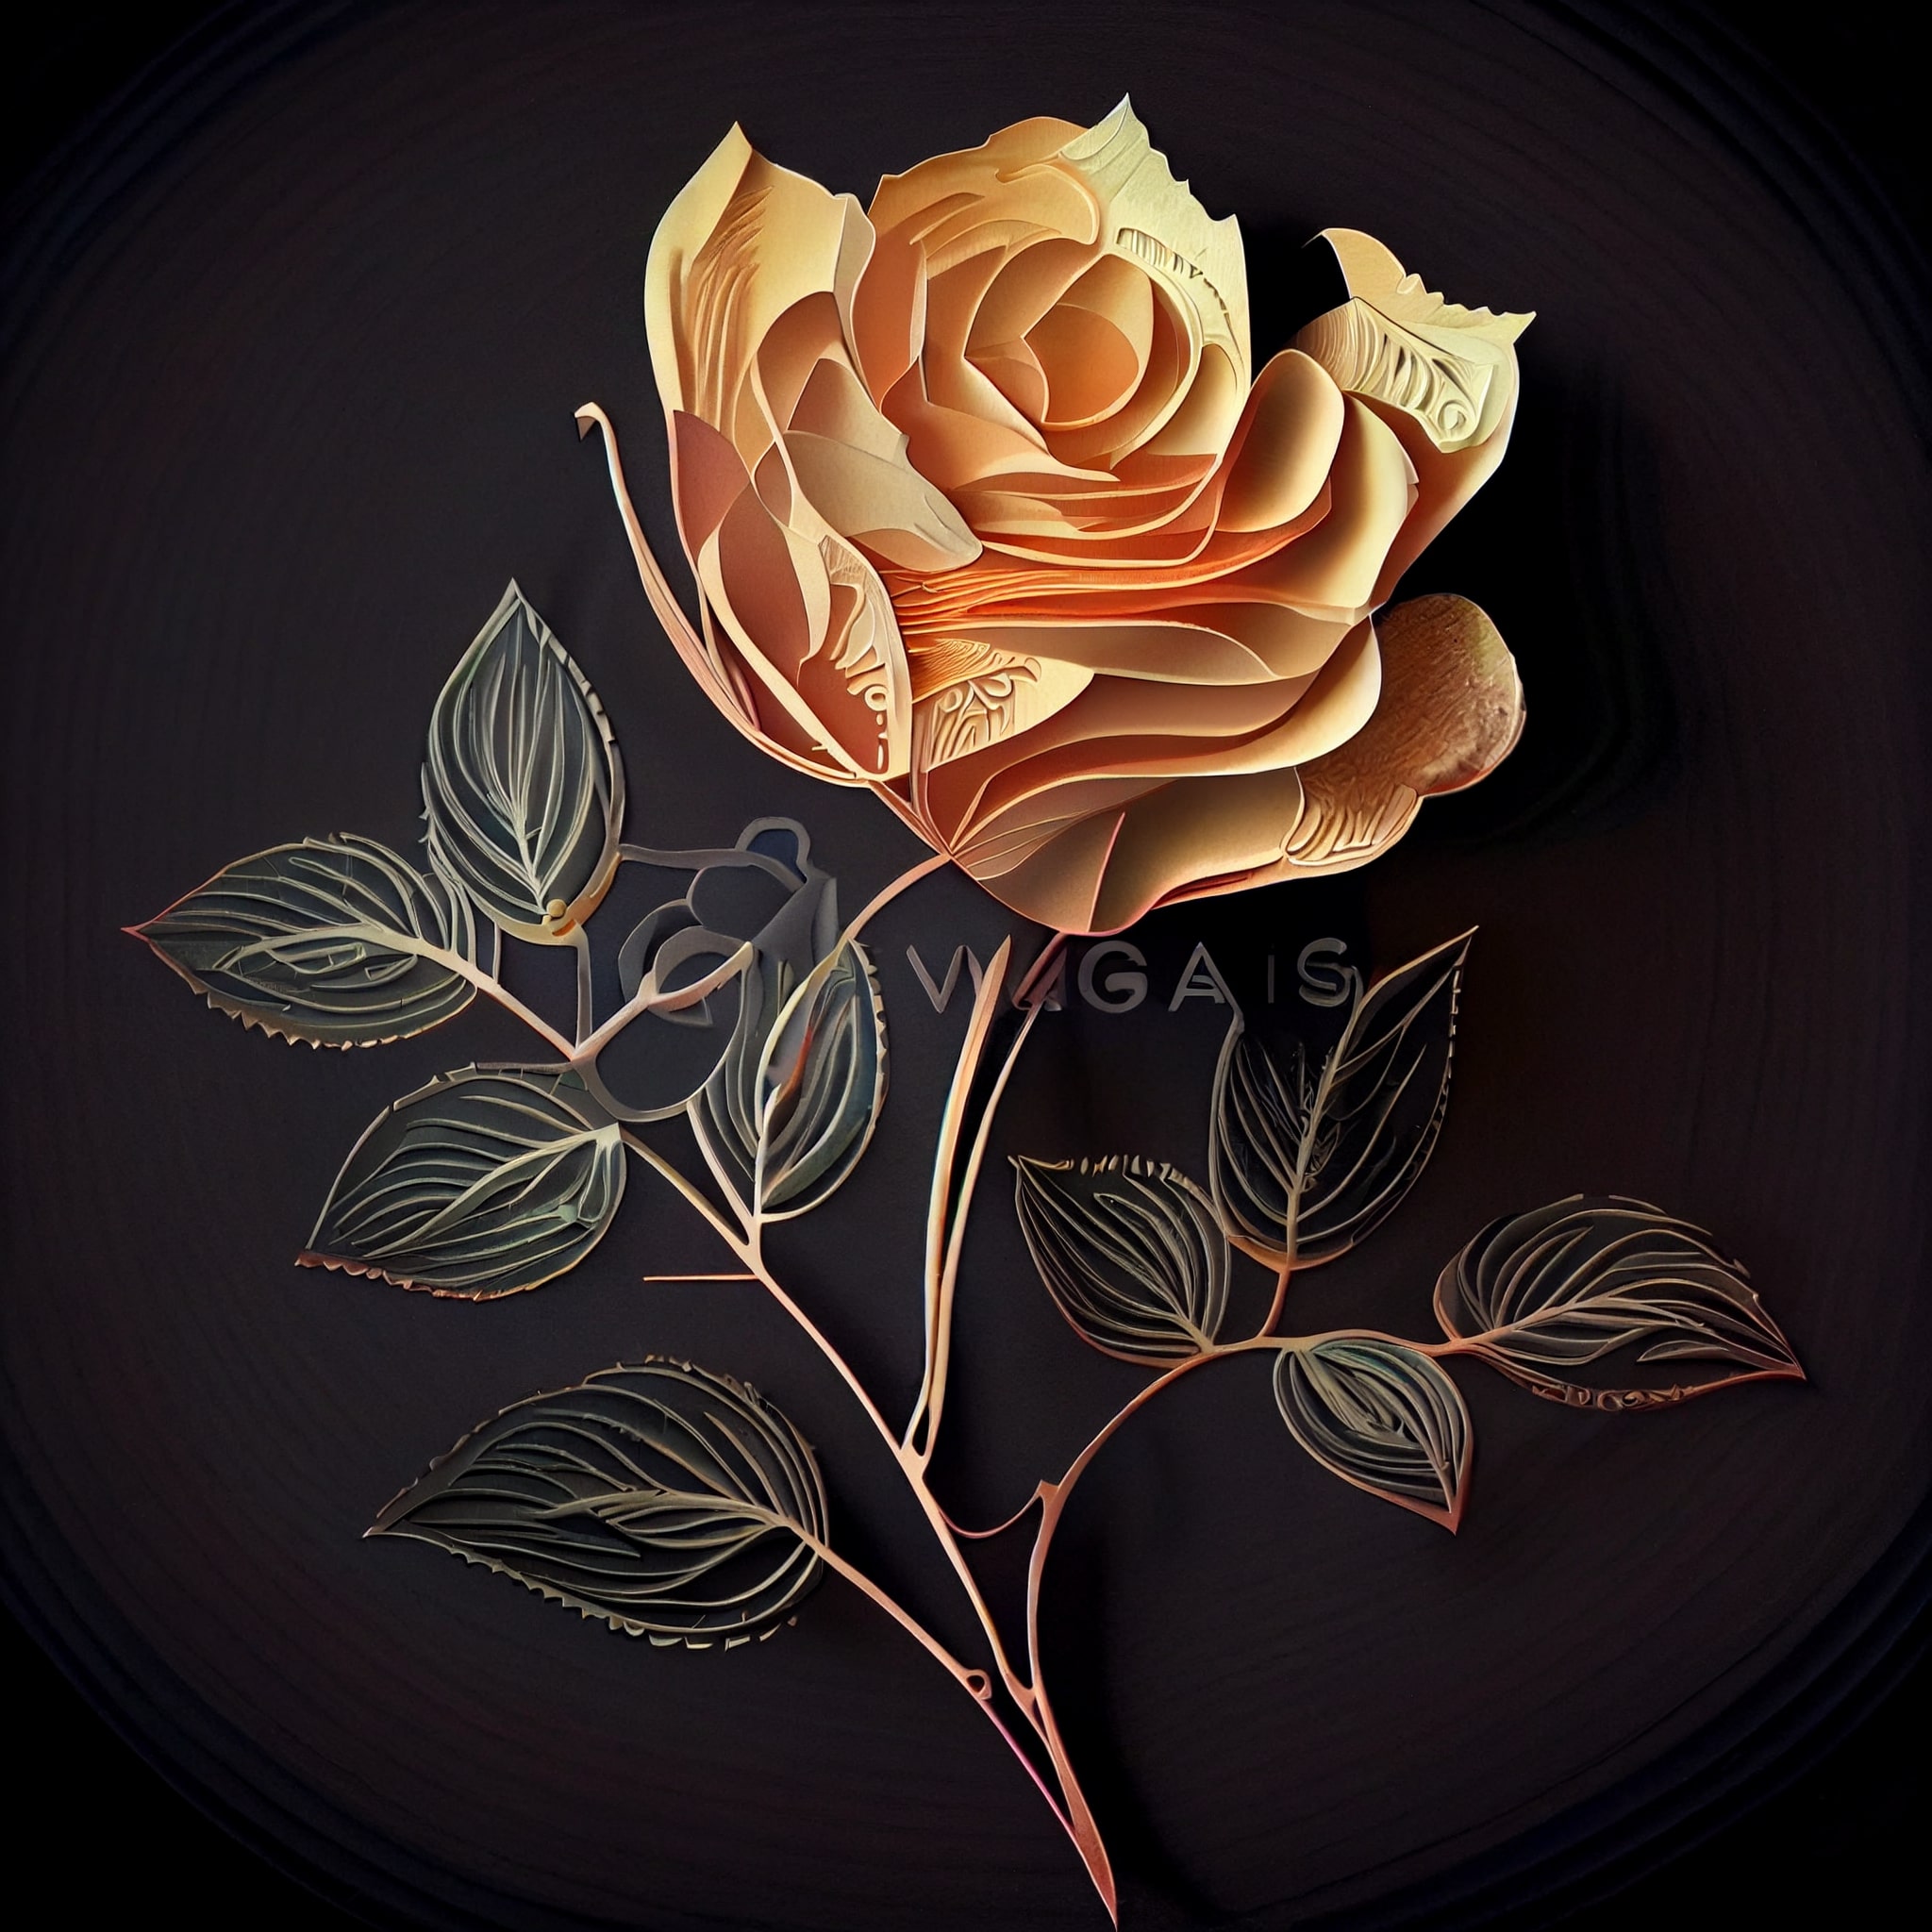 Drawing of a rose on a black background.